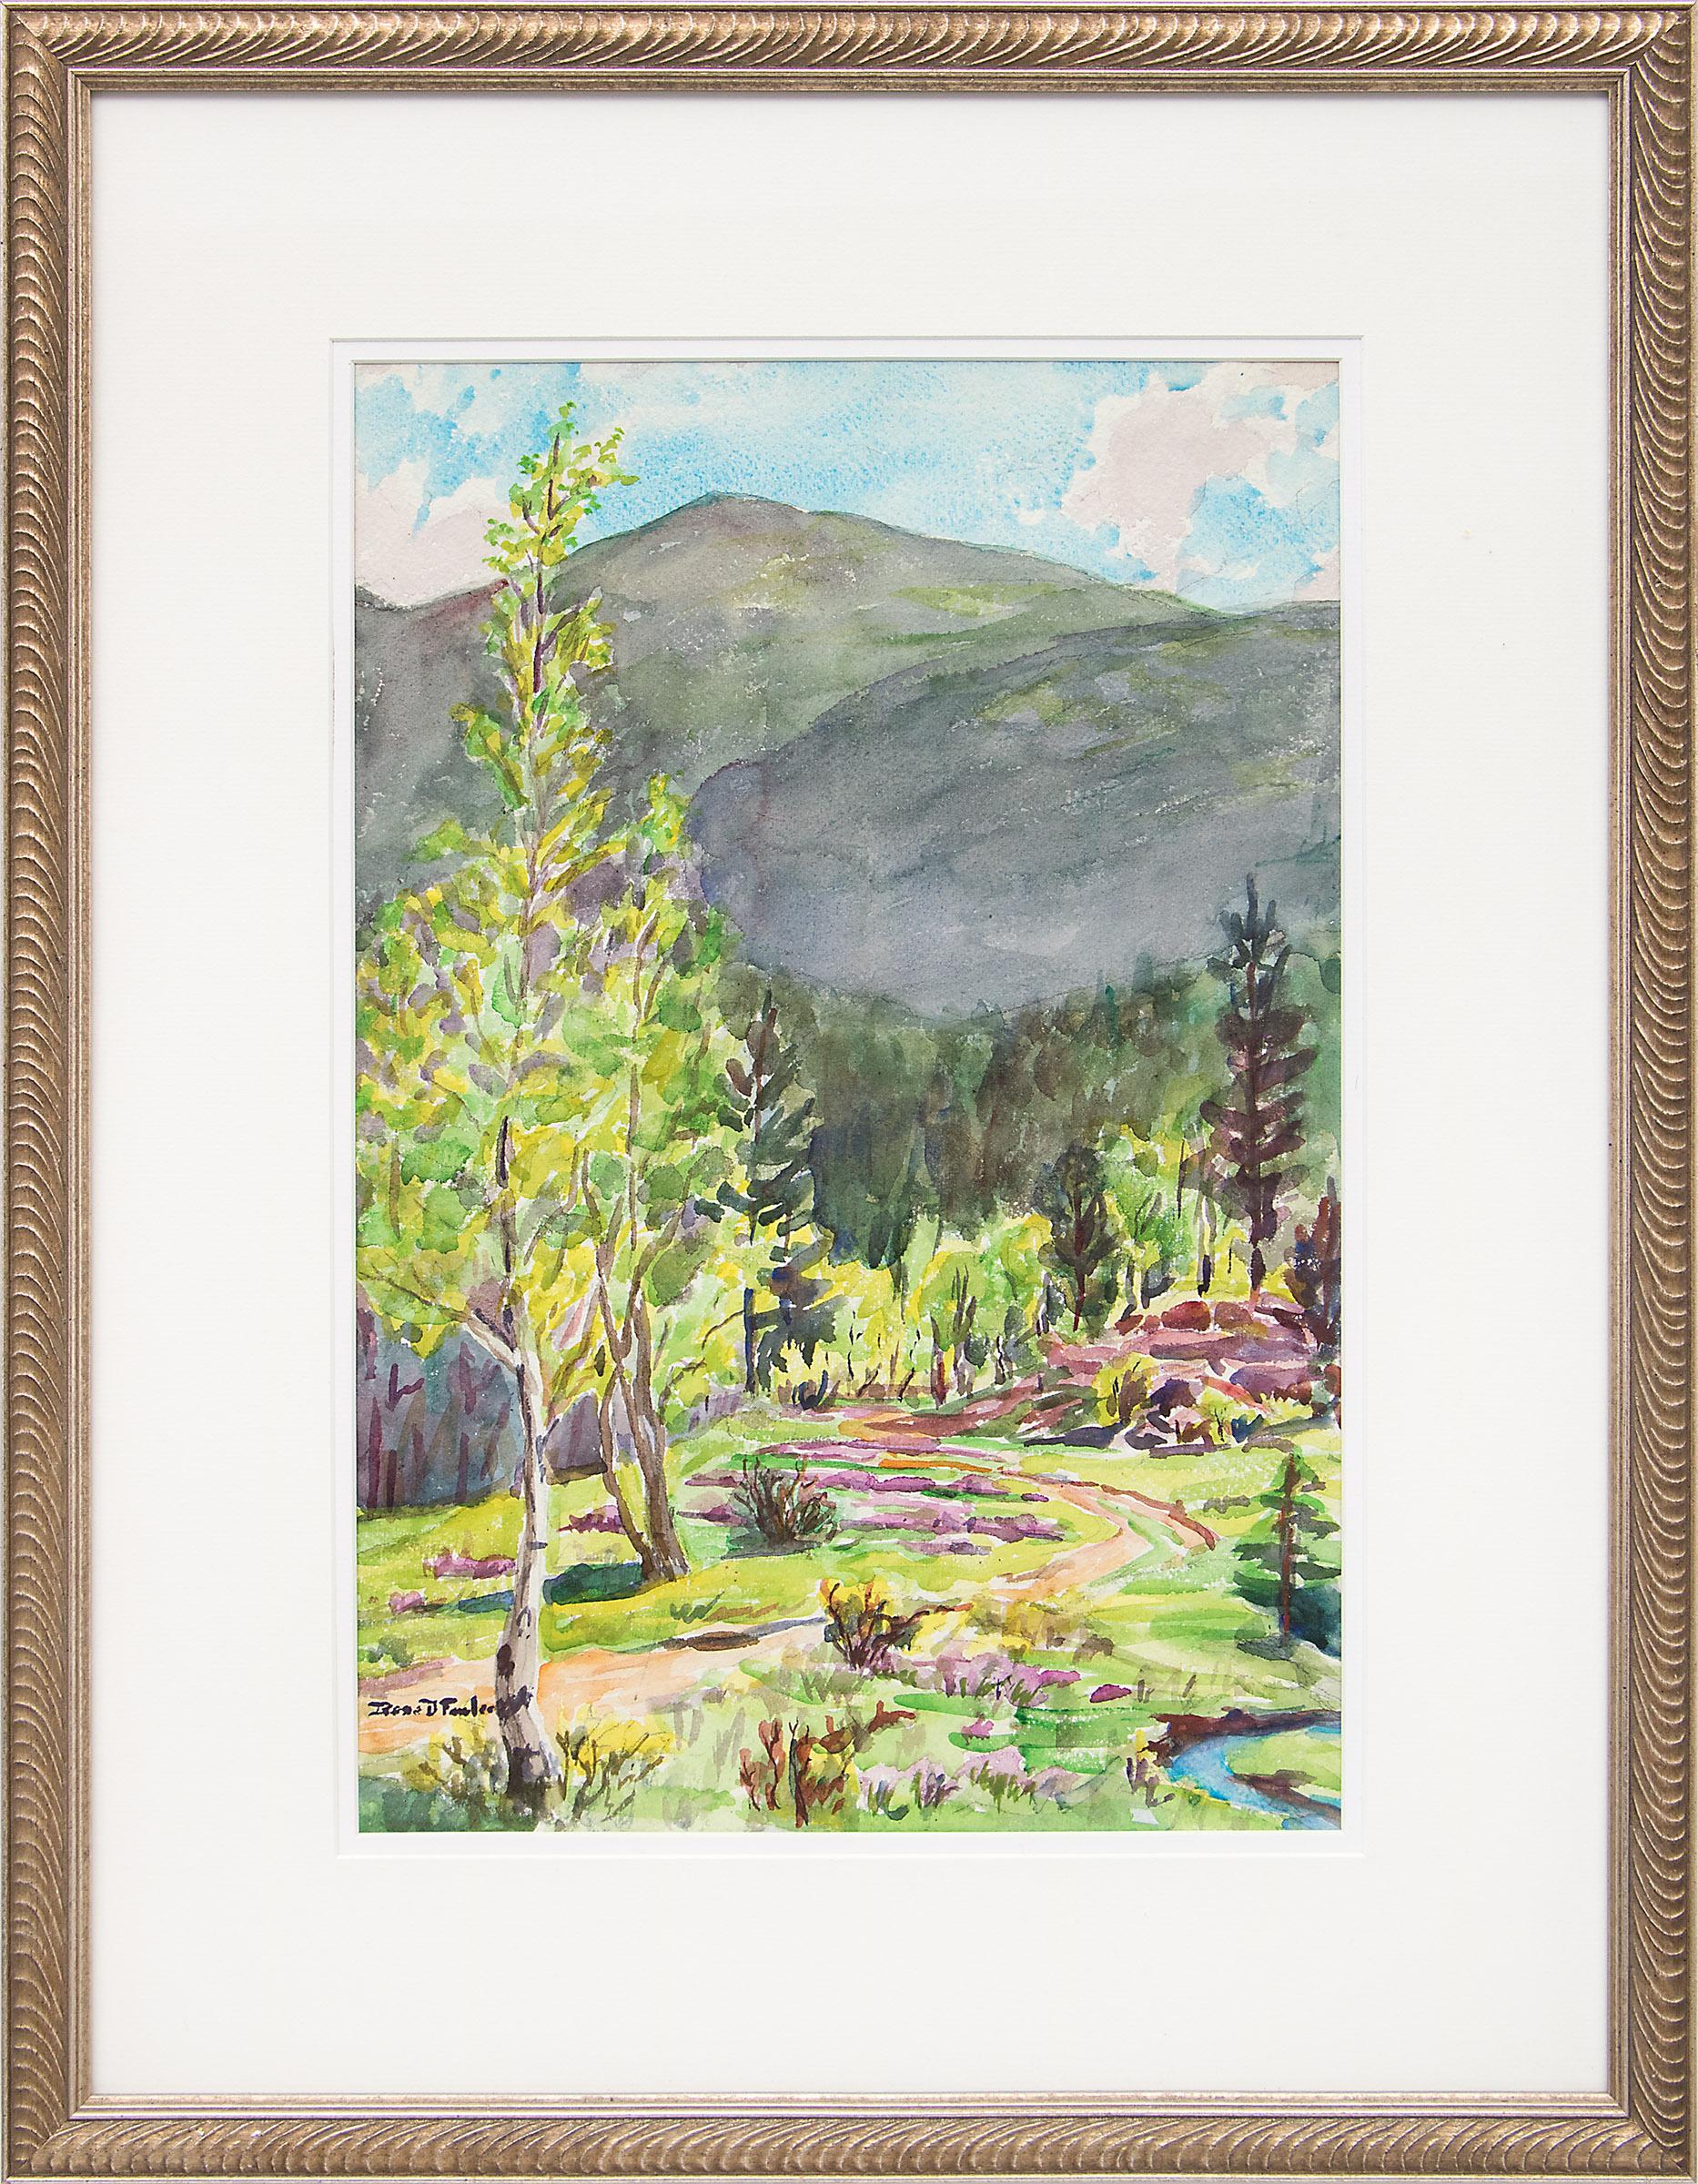 Early Summer, Colorado Mountains, 1950s Landscape with Aspens, Pines & Stream